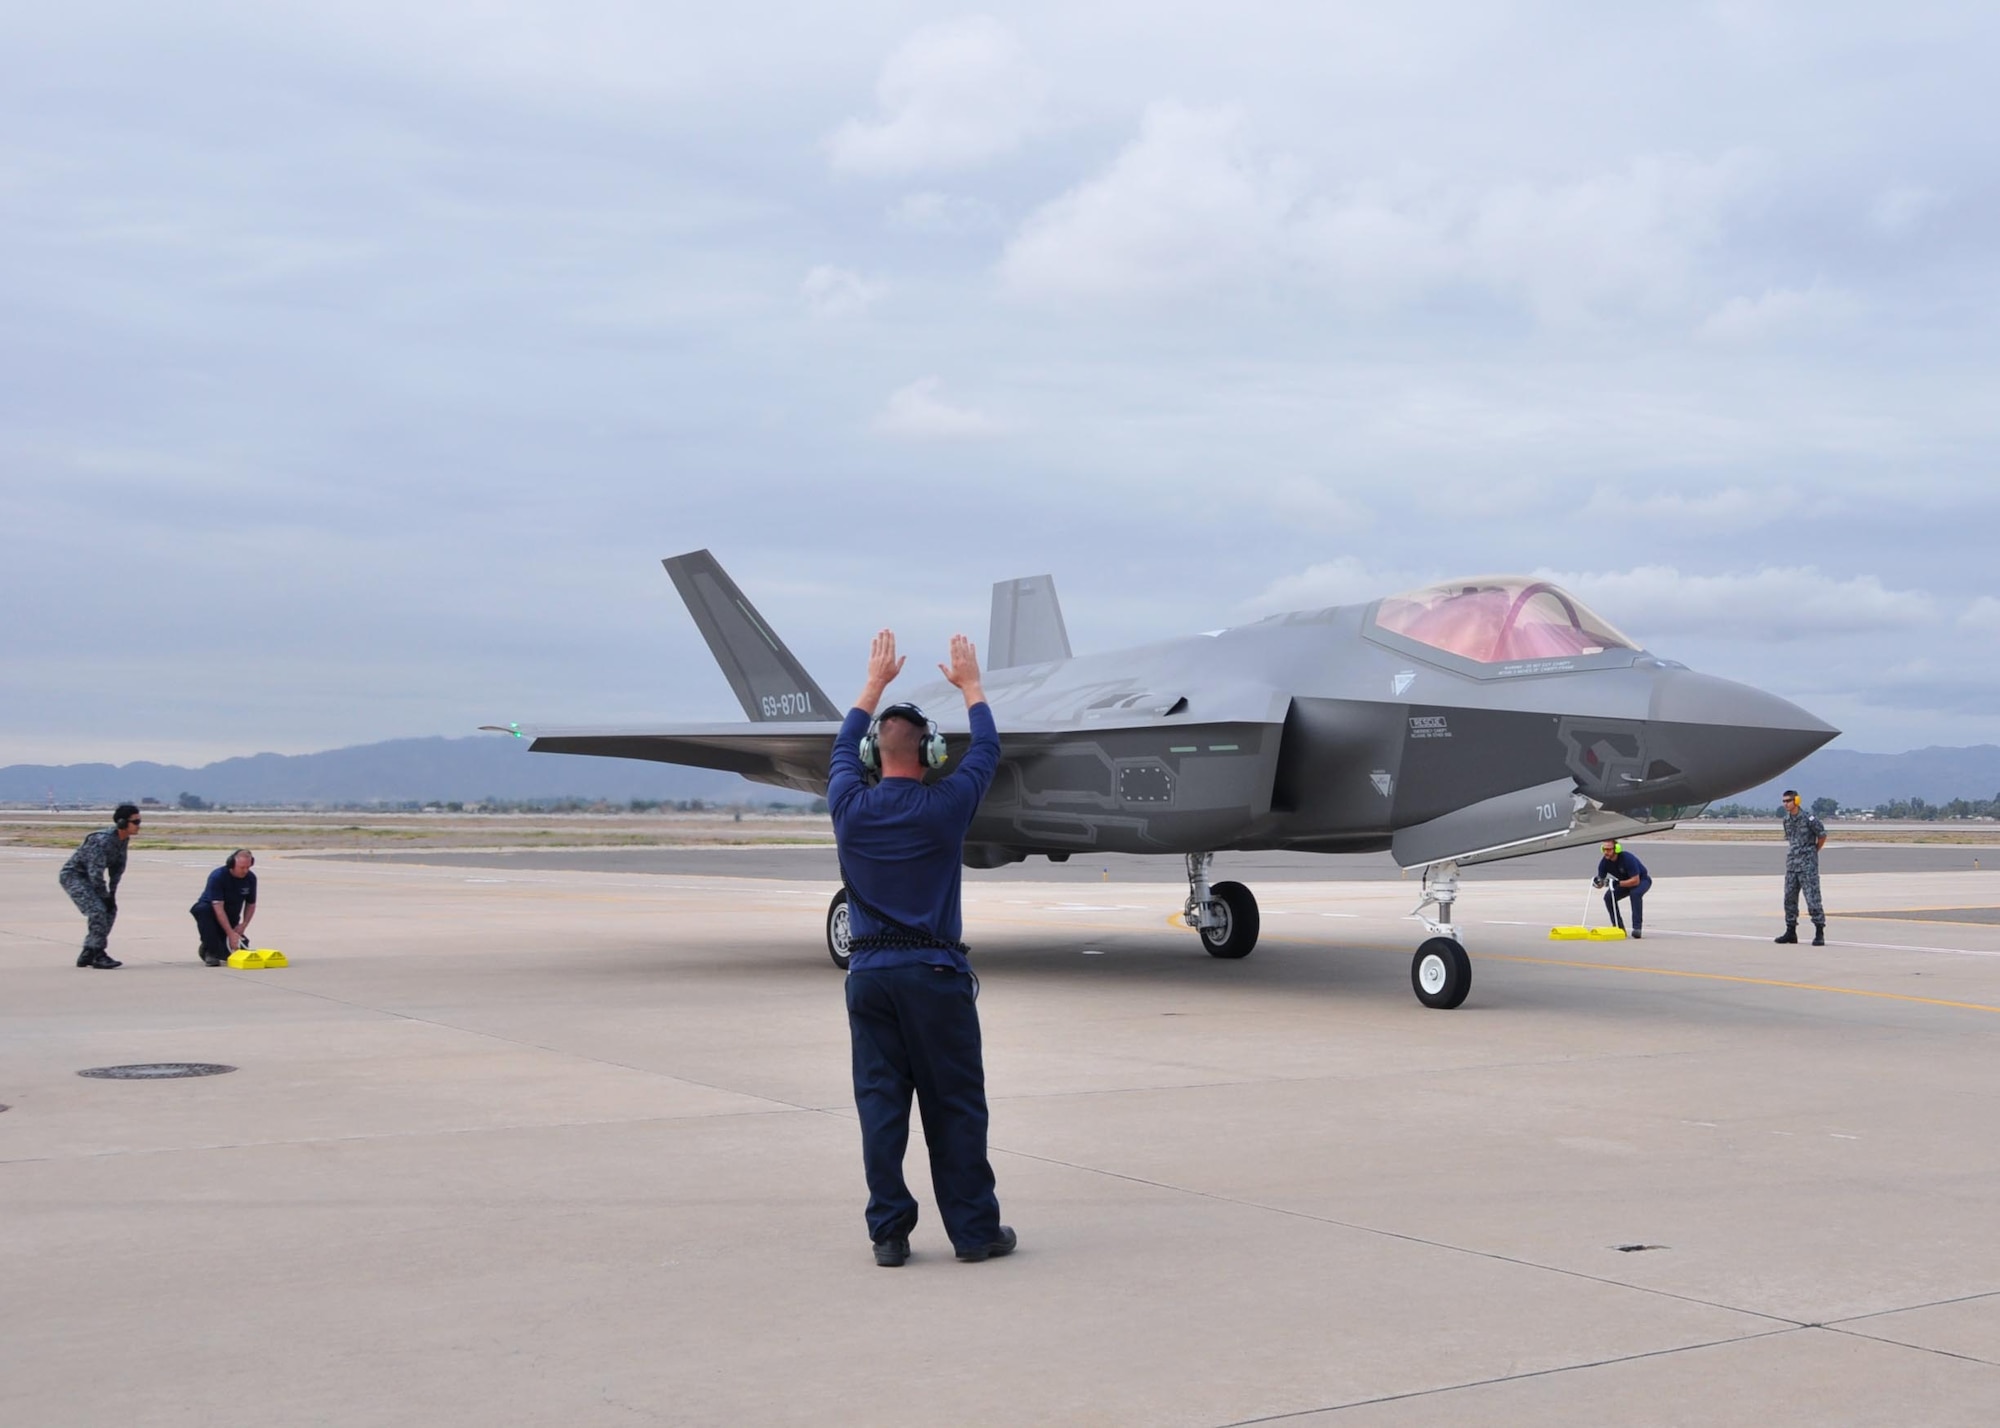 Lockheed Martin and Japanese Air Self-Defense Force personnel work together to taxi in the arrival of the first Foreign Military Sales F-35A onto the 944th Fighter Wing ramp Nov. 28 at Luke Air Force Base, Ariz. The arrival marked the next step for the international F-35 training program. (U.S. Air Force photo by Tech. Sgt. Louis Vega Jr.)